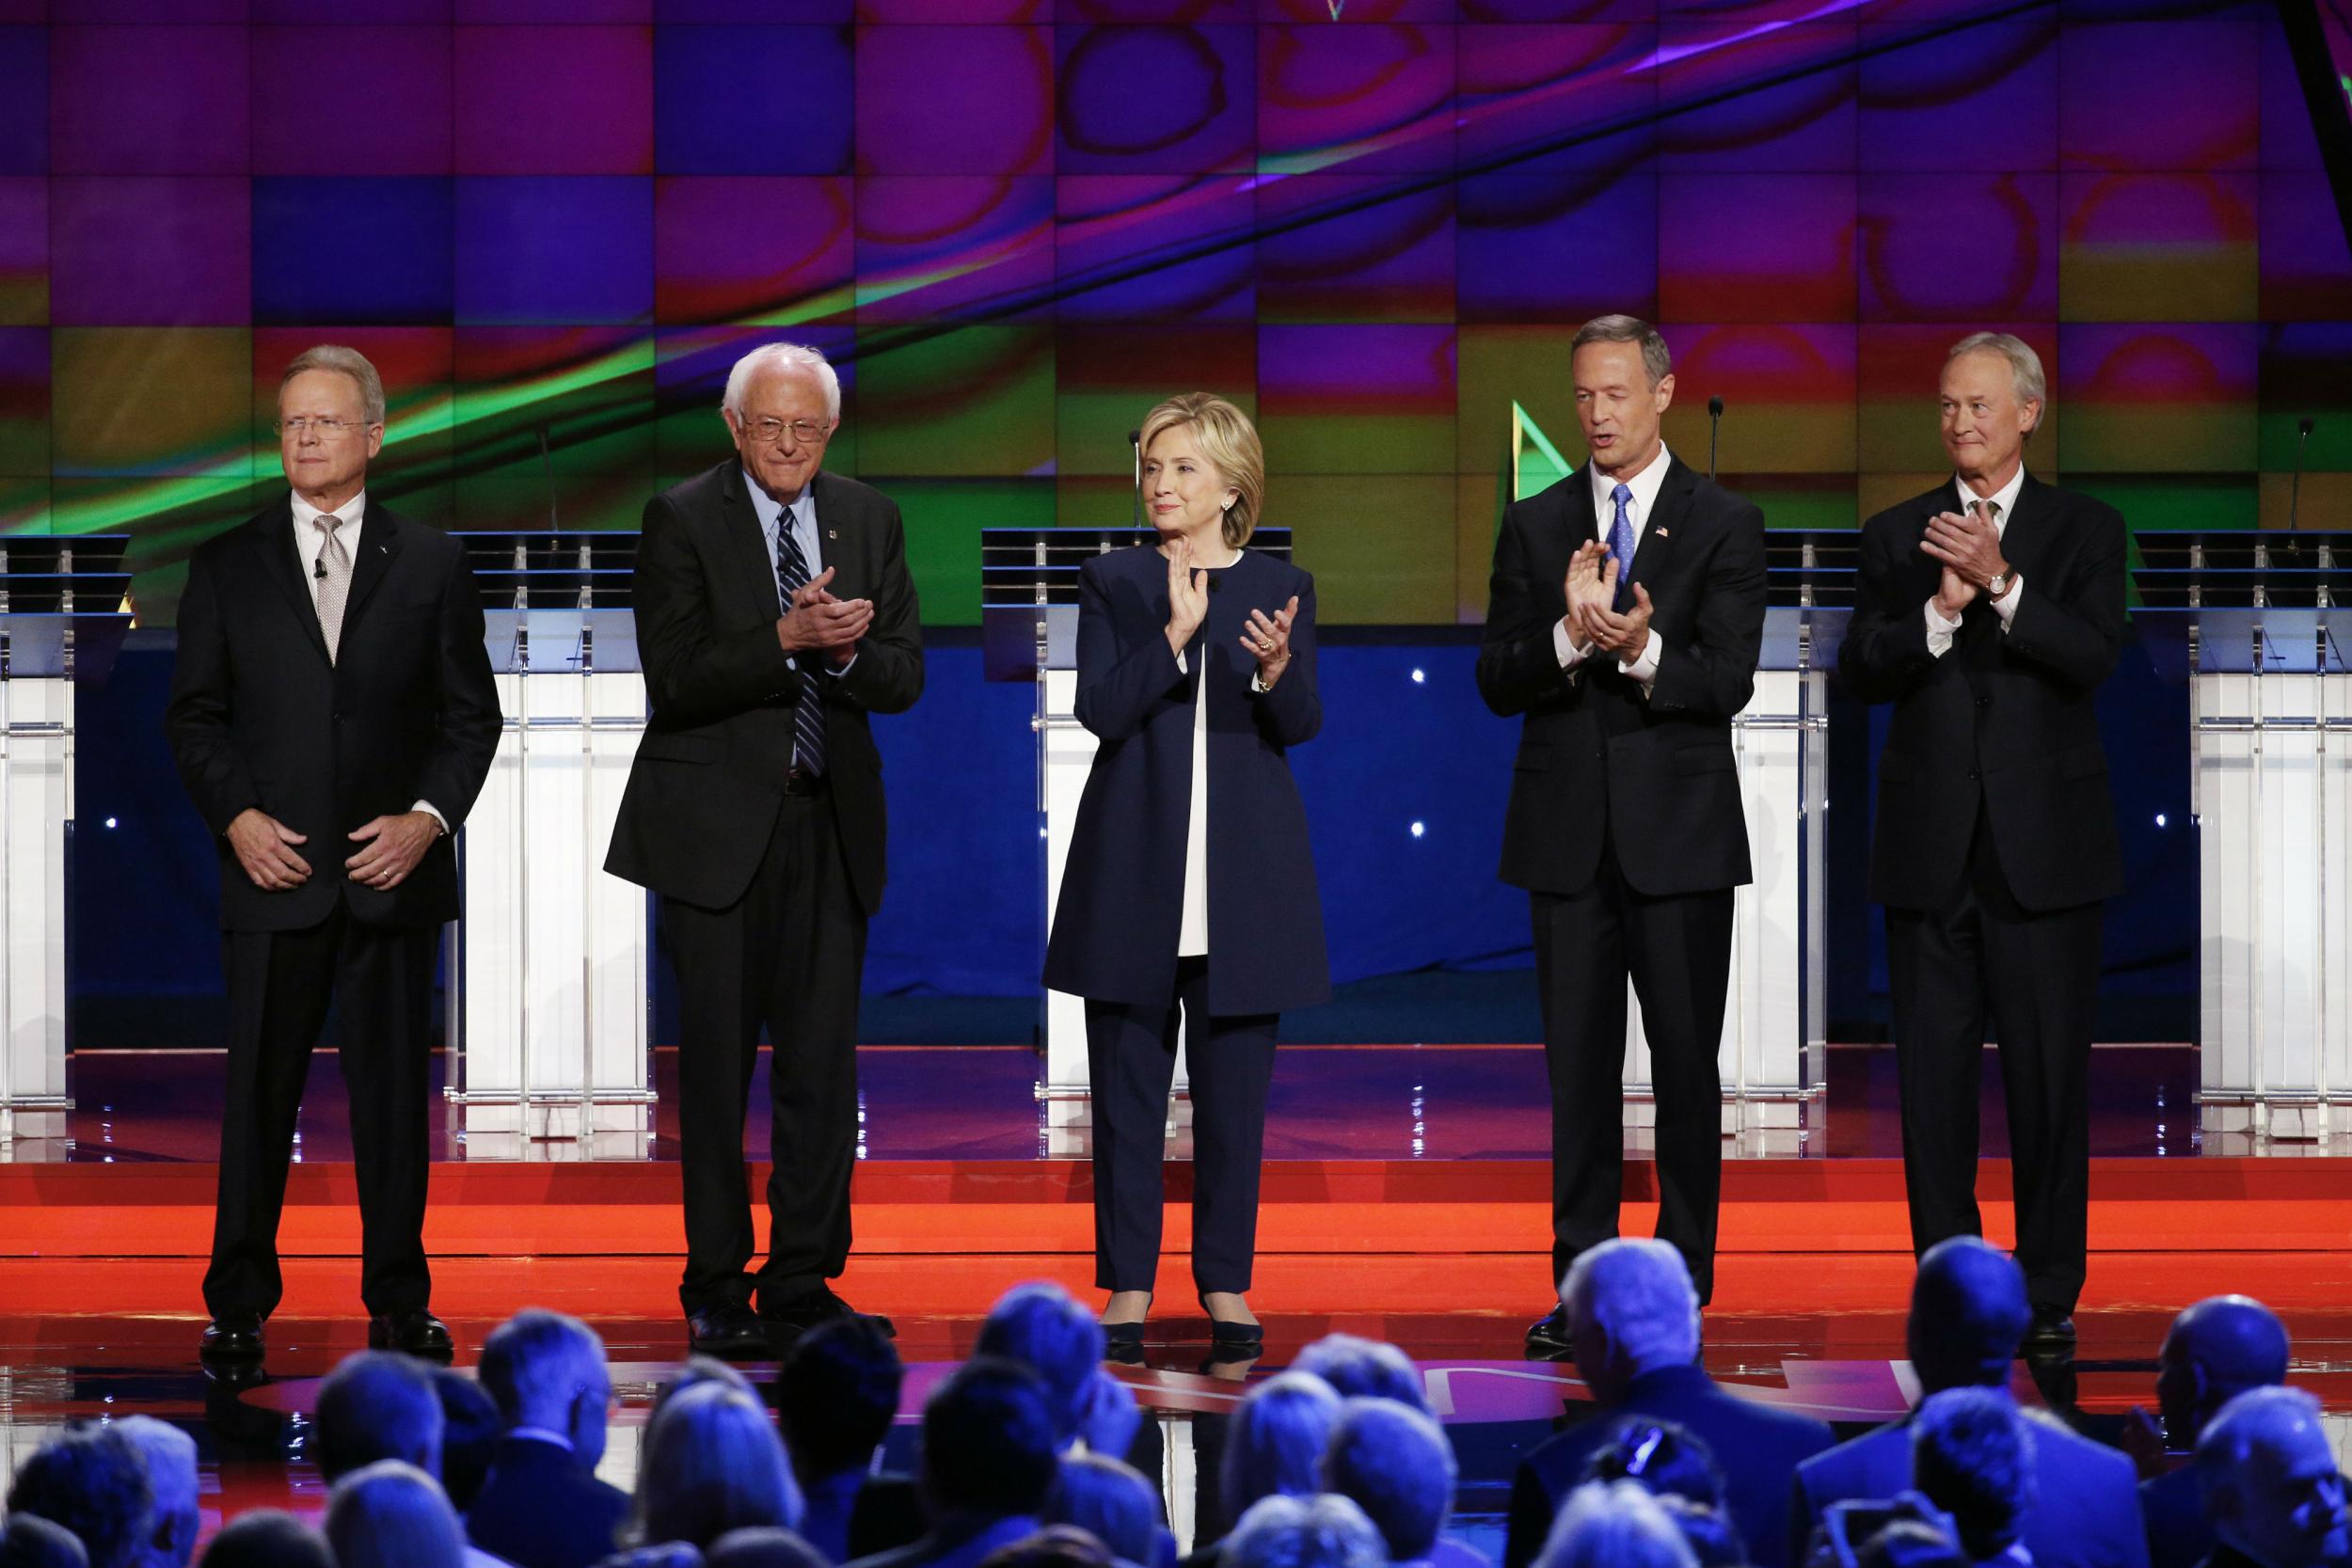 Five Democratic hopefuls are involved in the party's first debate